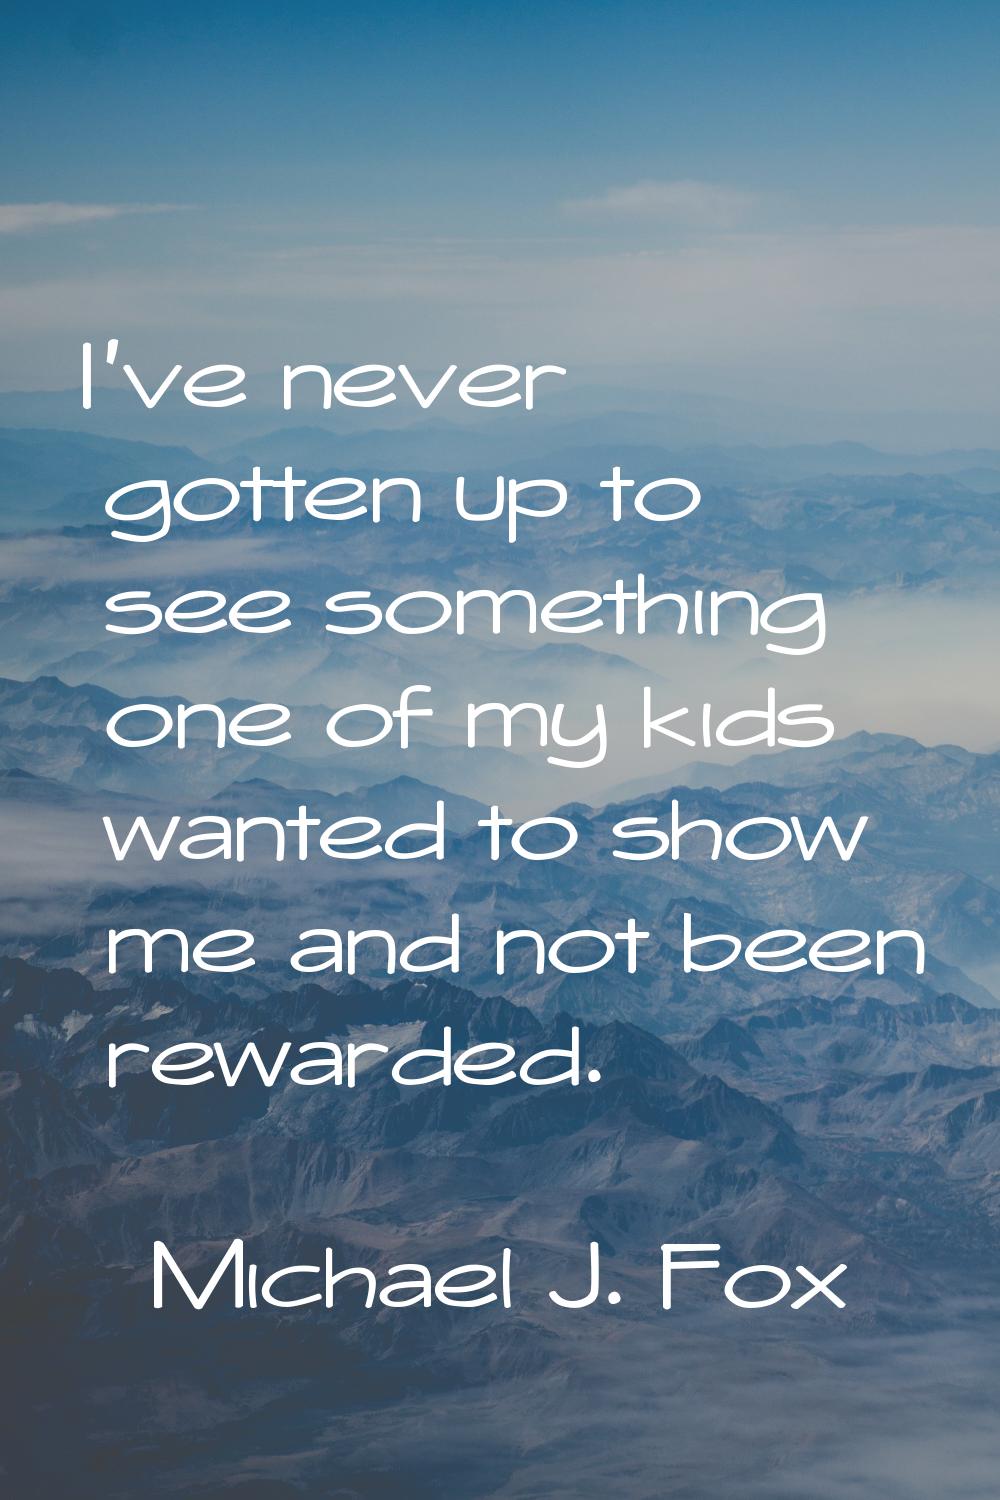 I've never gotten up to see something one of my kids wanted to show me and not been rewarded.